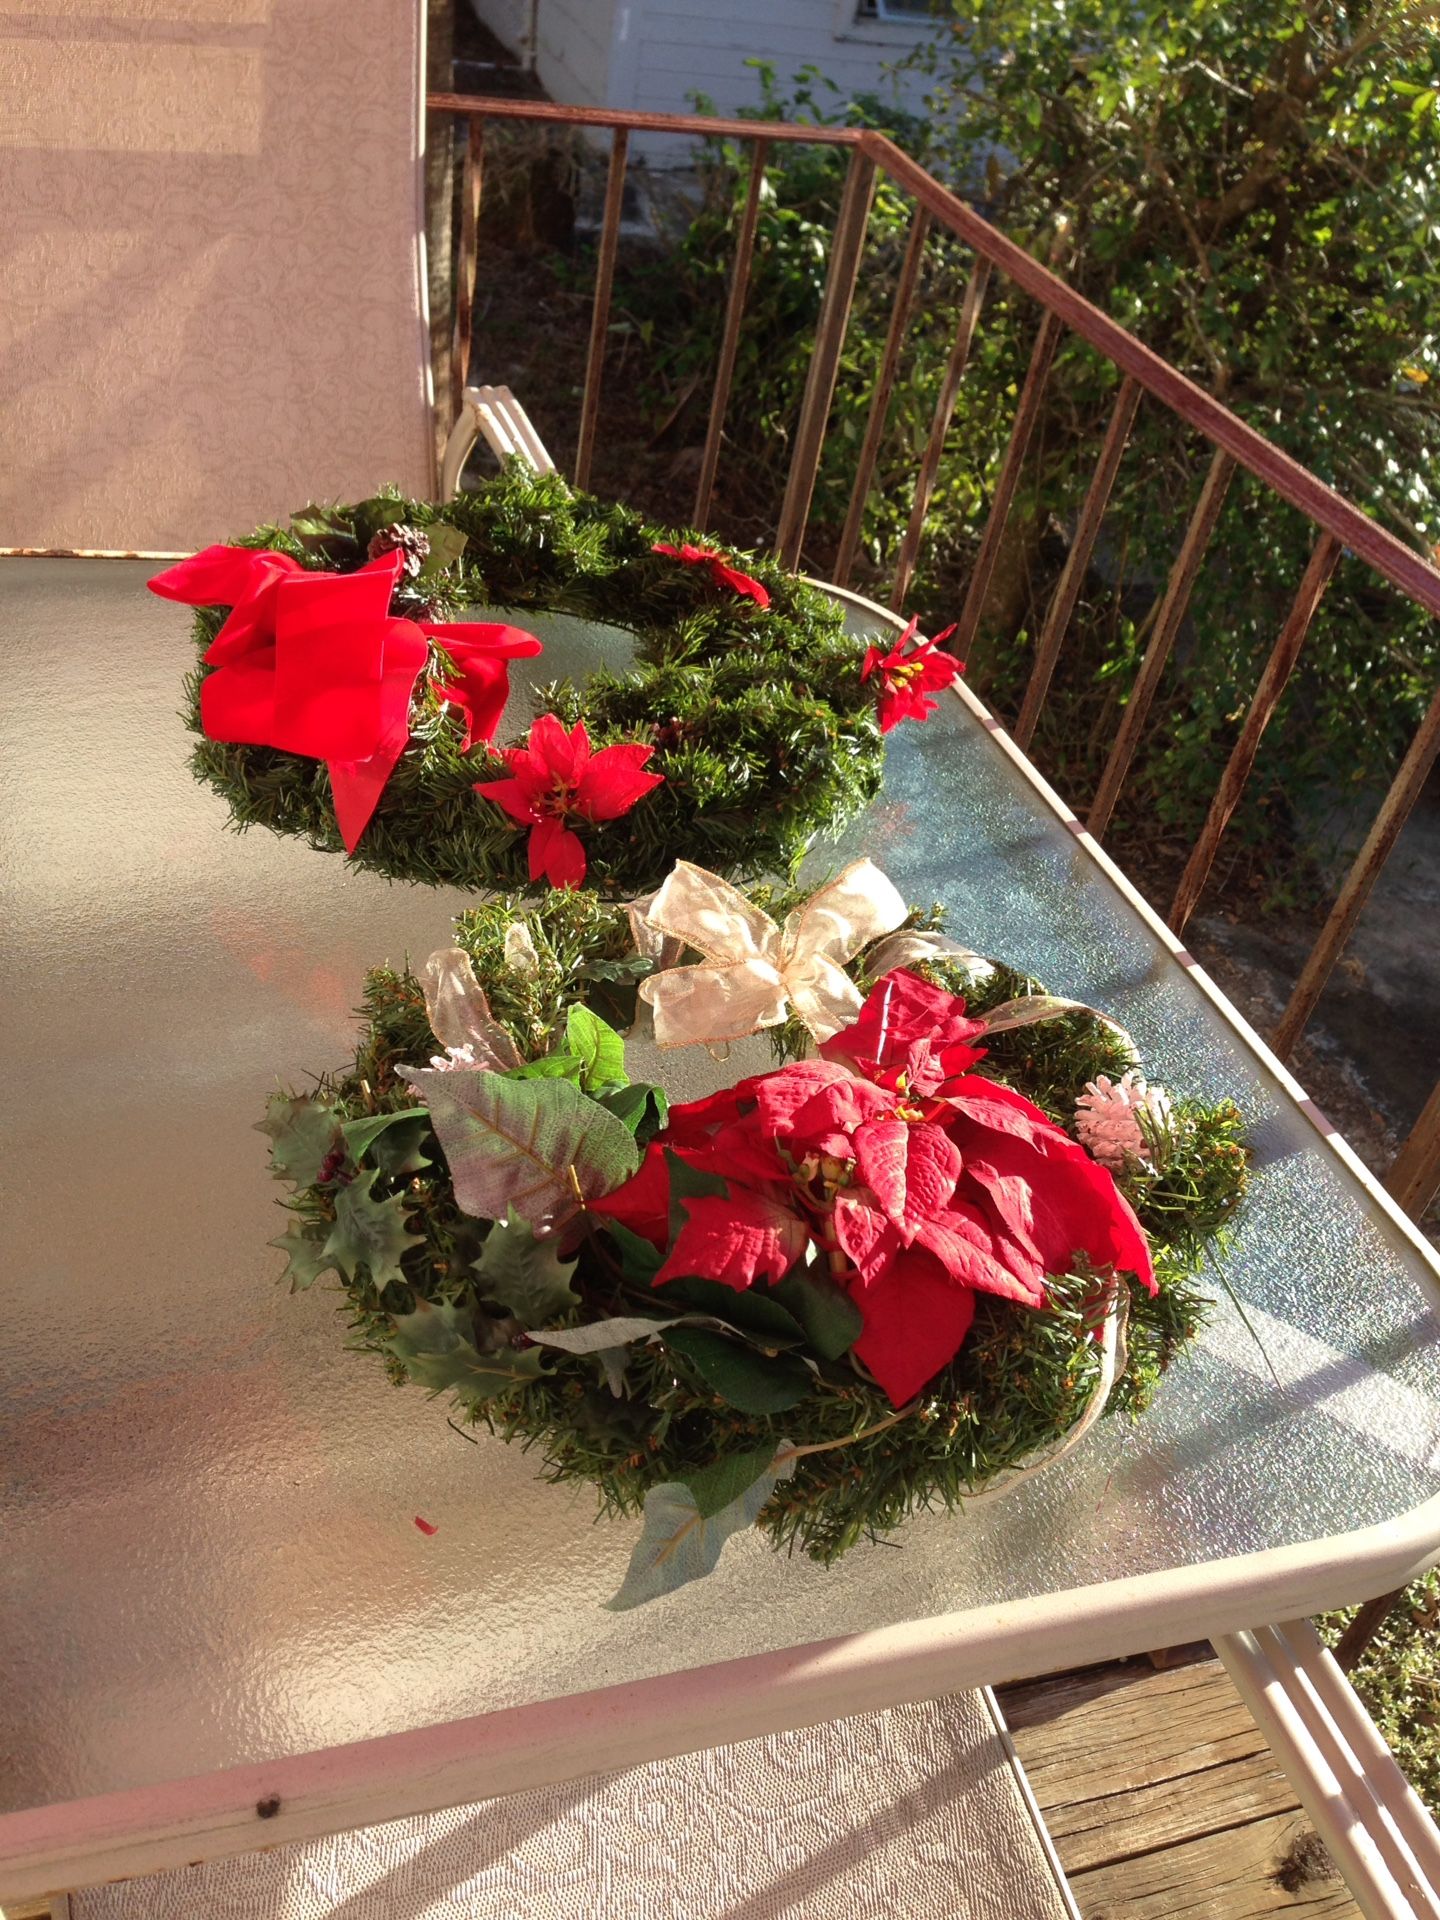 FREE XMAS WREATHS TODAY PLEASE MESSAGE ME FOR PICK UP!